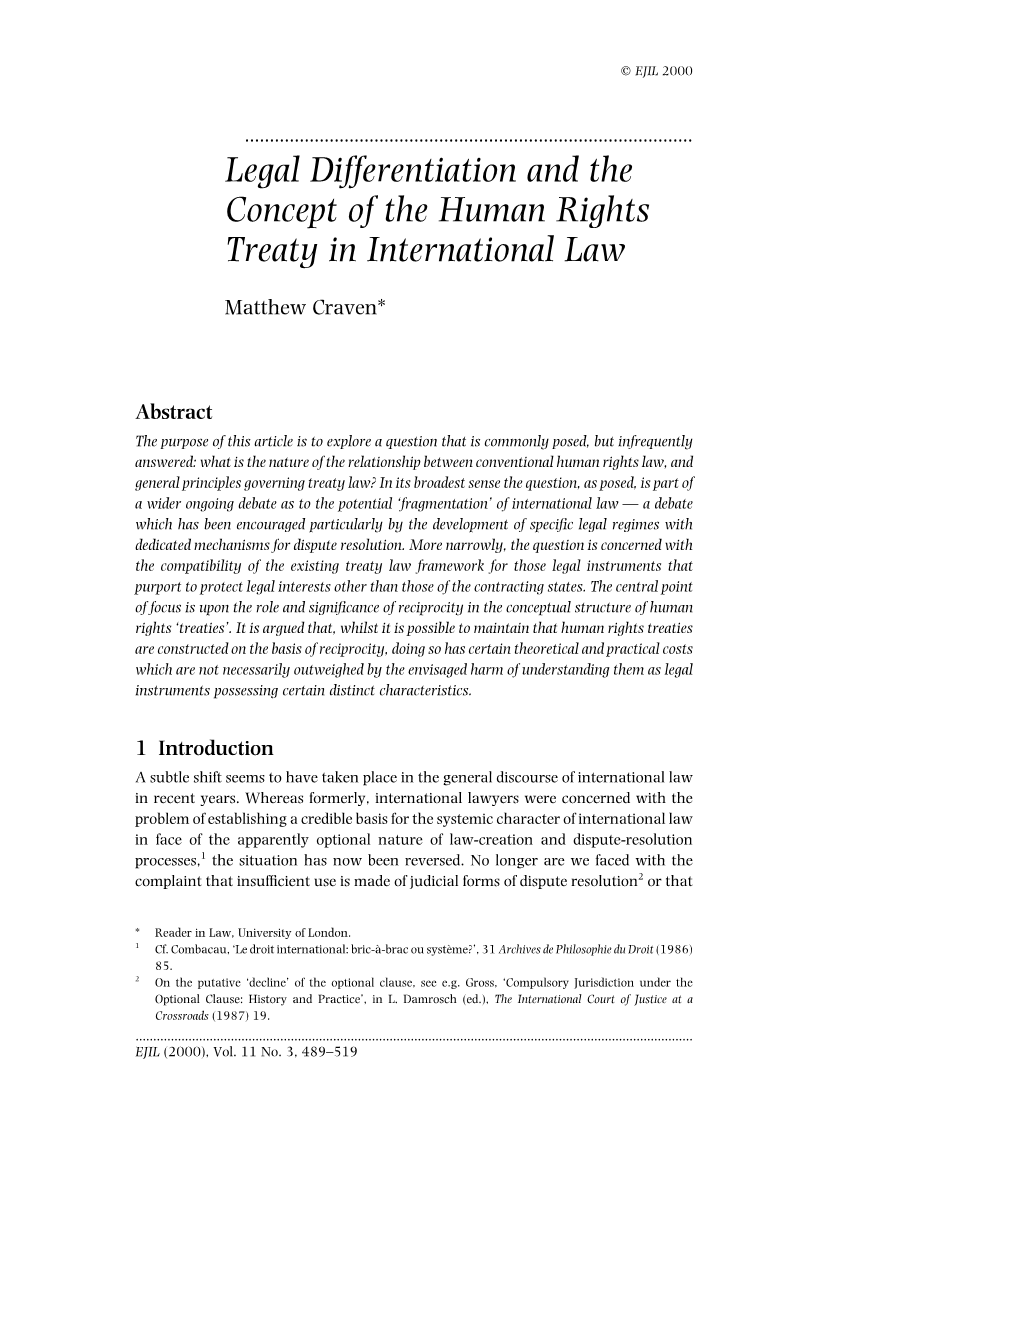 Legal Differentiation and the Concept of the Human Rights Treaty in International Law